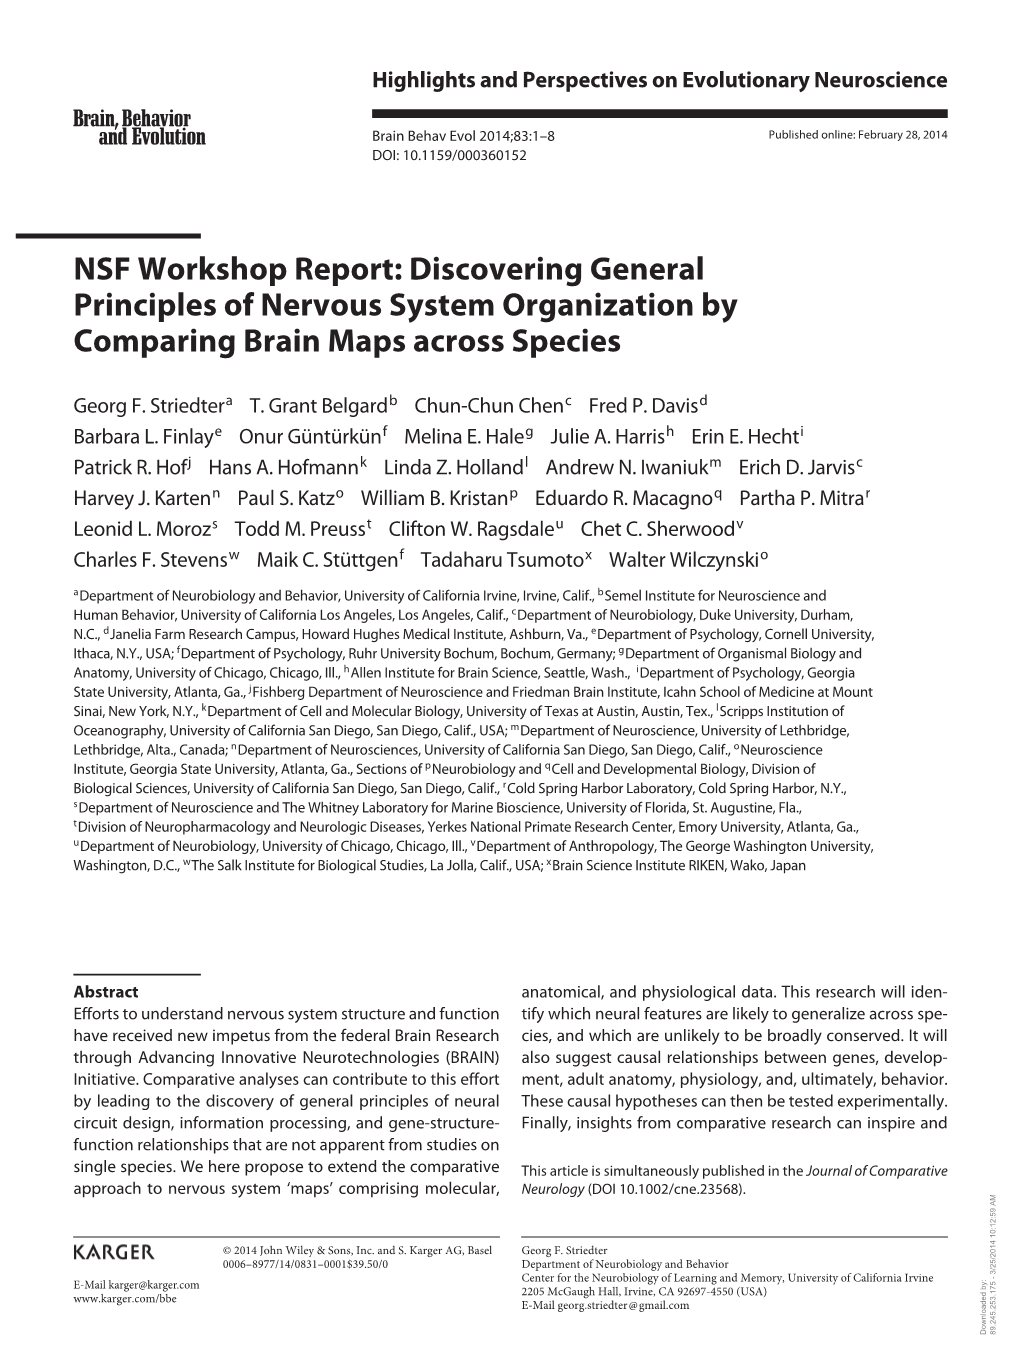 Discovering General Principles of Nervous System Organization by Comparing Brain Maps Across Species